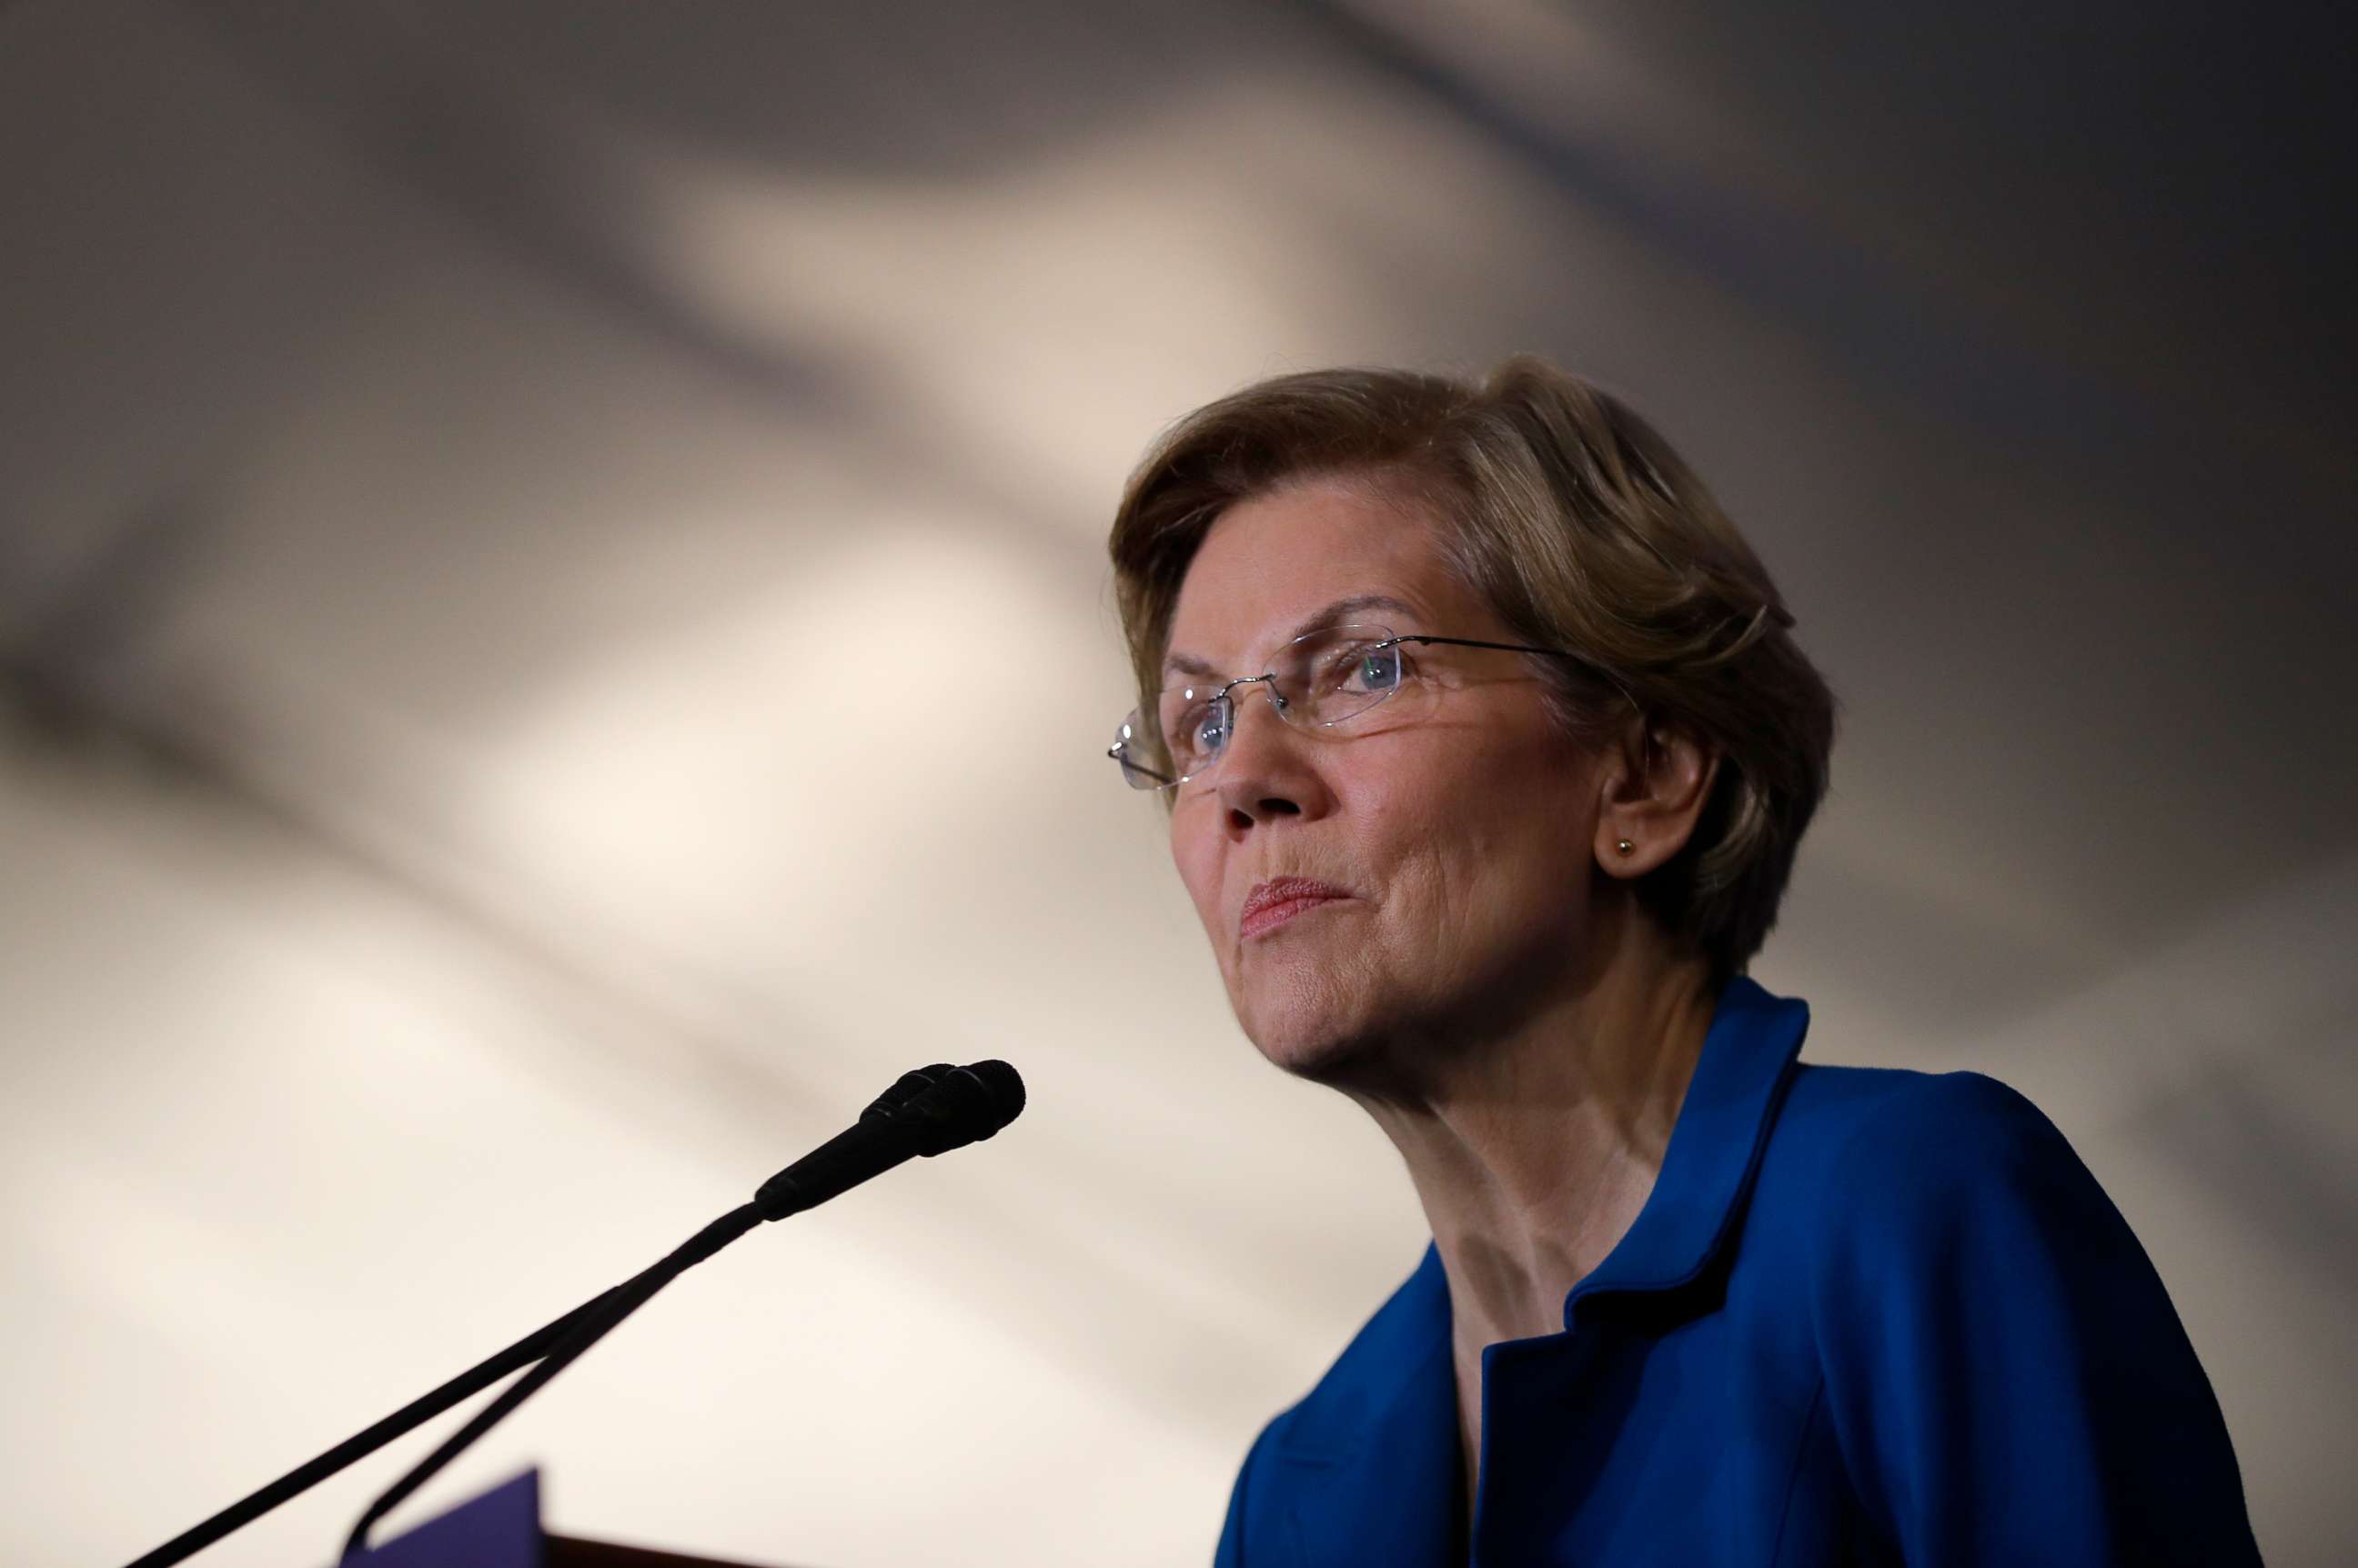 PHOTO: Democratic presidential candidate Sen. Elizabeth Warren appears at her New Hampshire primary night rally in Manchester, N.H., Feb. 11, 2020.